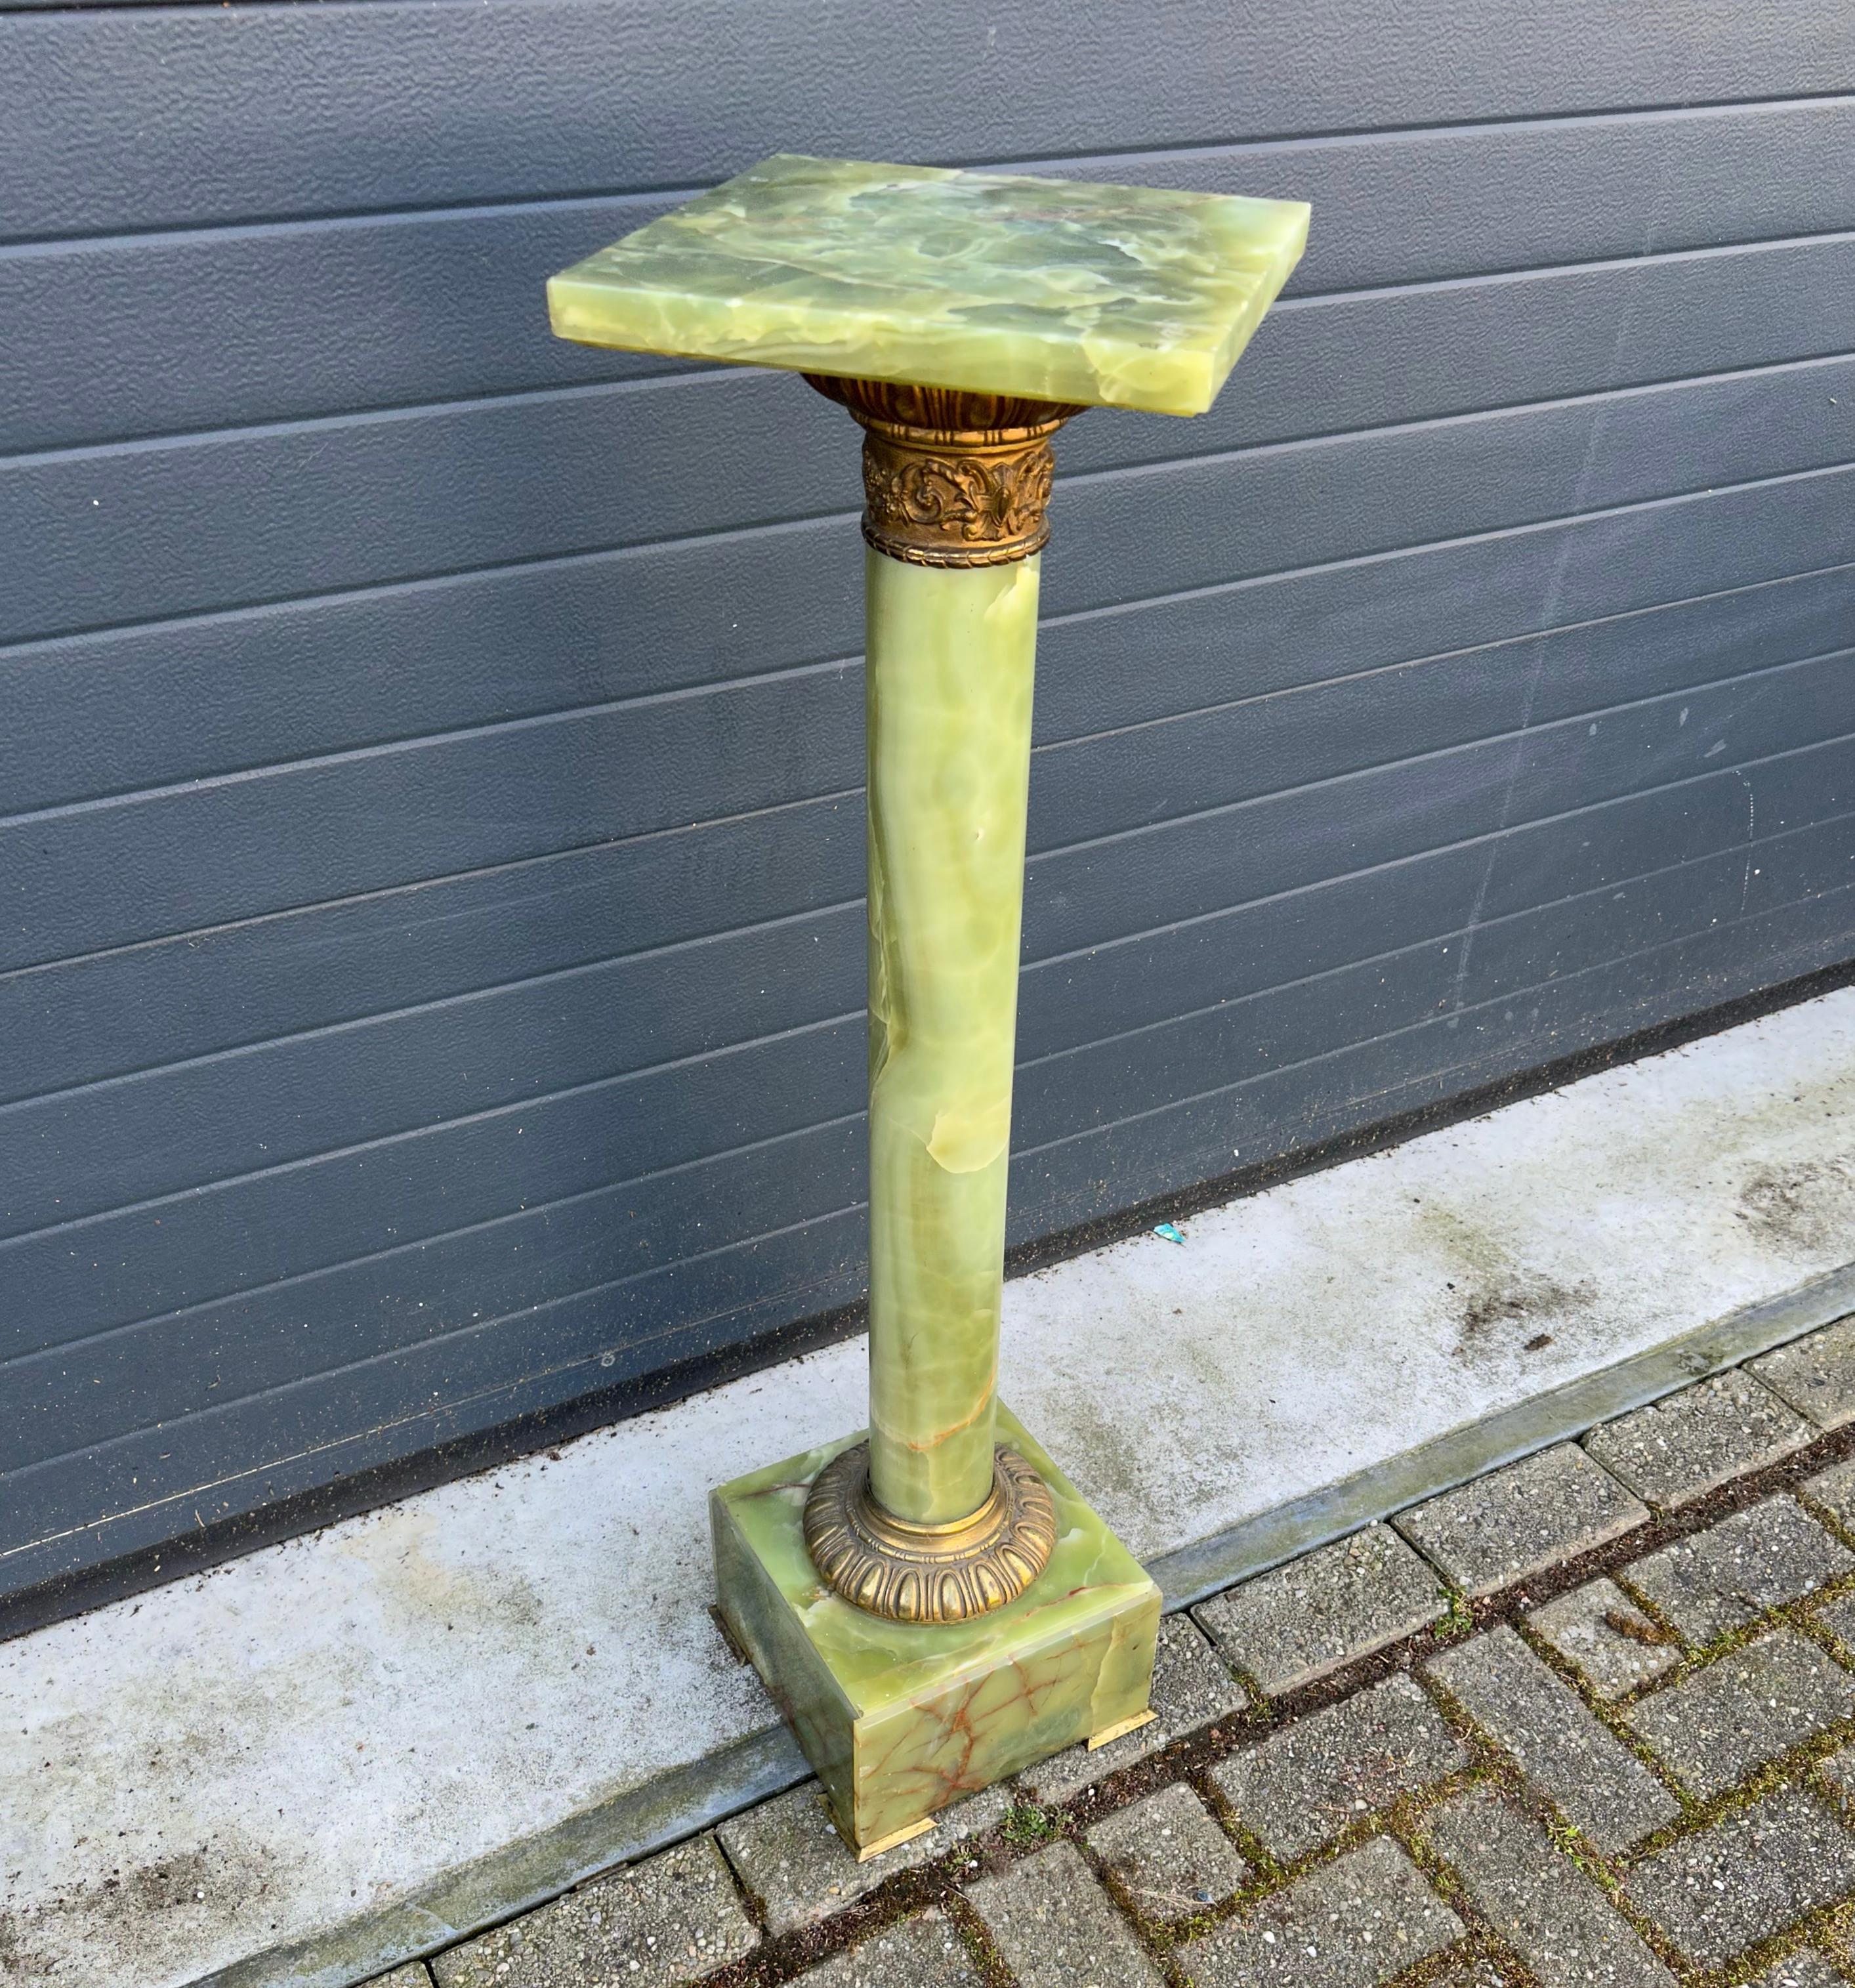 Wonderful column pedestal with a rotating top for perfectly displaying a work of art or otherwise.

This antique and classical design pedestal is perfect for showcasing an antique sculpture or bust. The slight wear, the shape and the wonderful